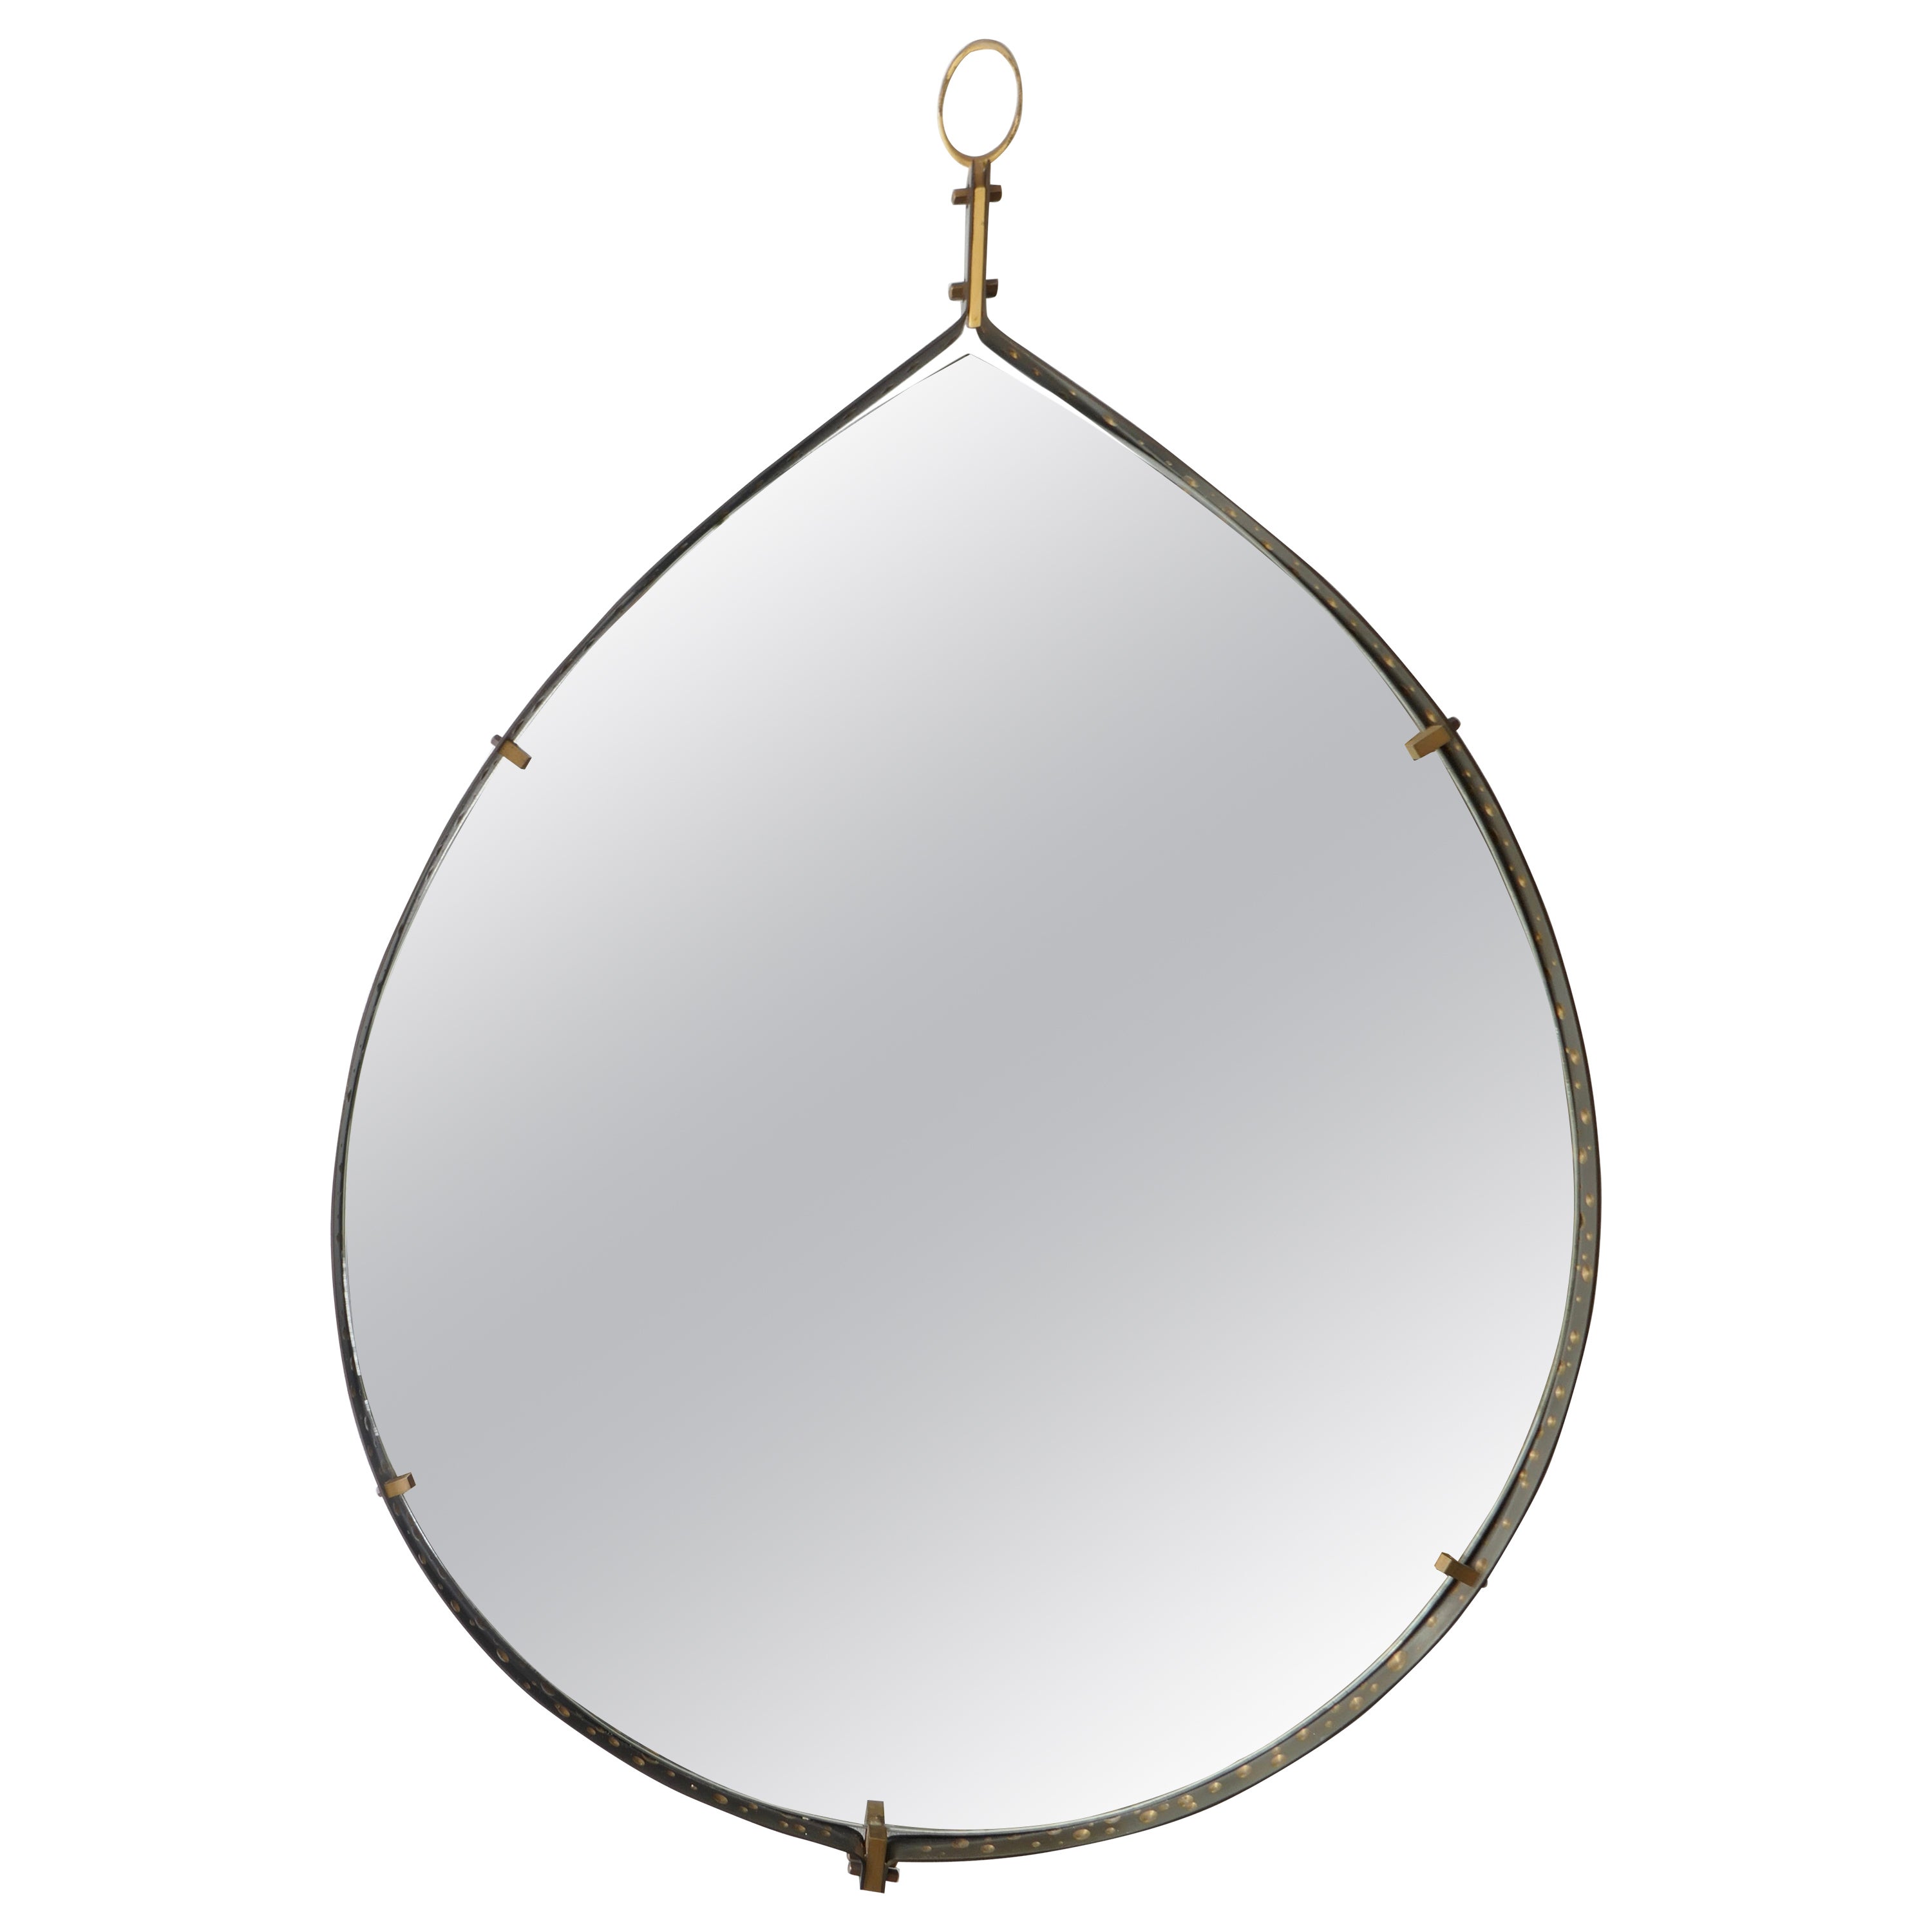 Teardrop-Shaped Mirror with Hammered Iron Frame & Brass Details, Italy, 1960s